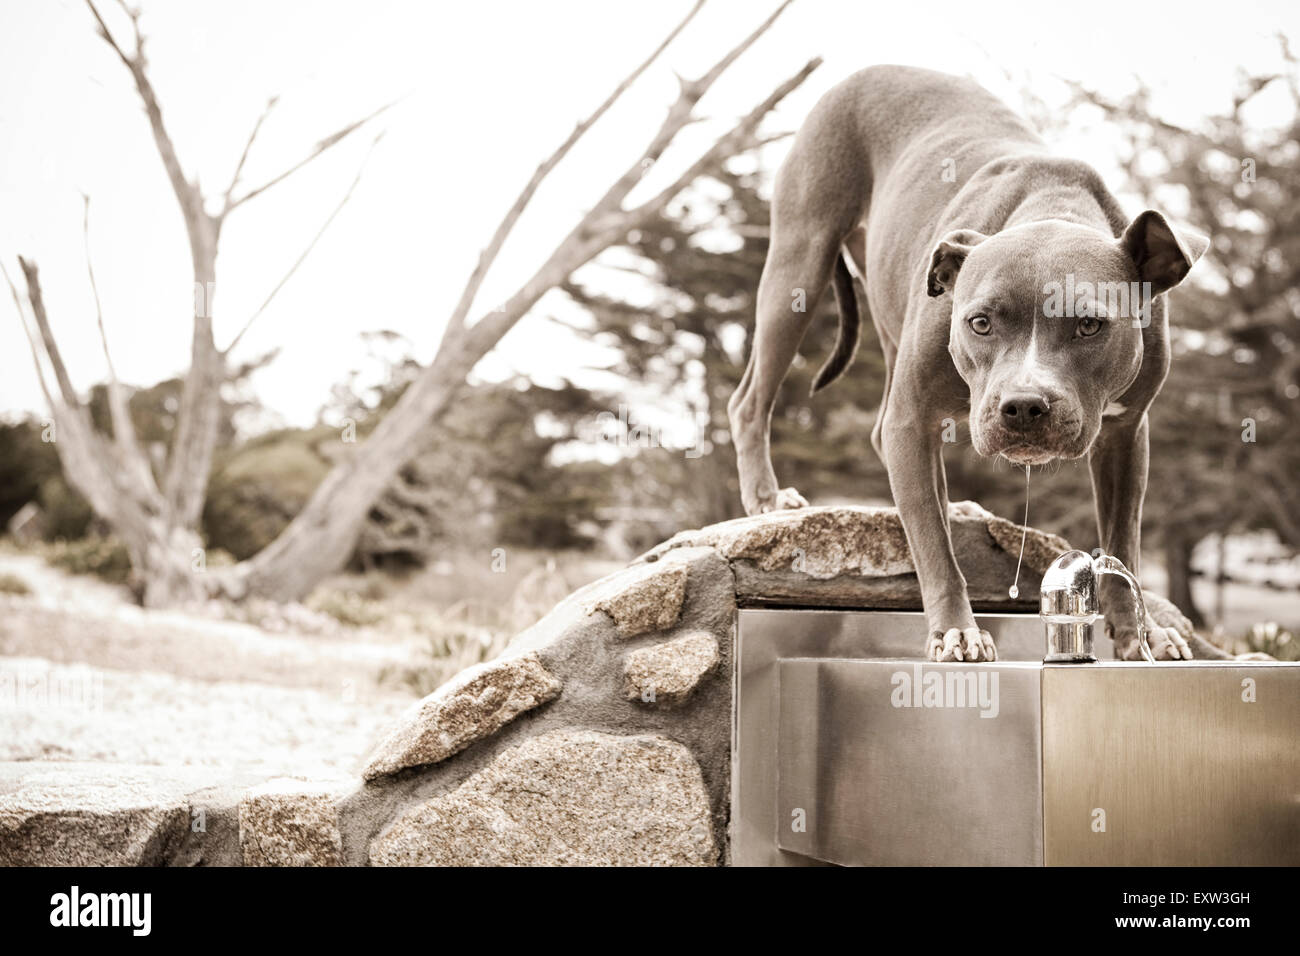 Adult Blue Pitbull drinks from water fountain Stock Photo